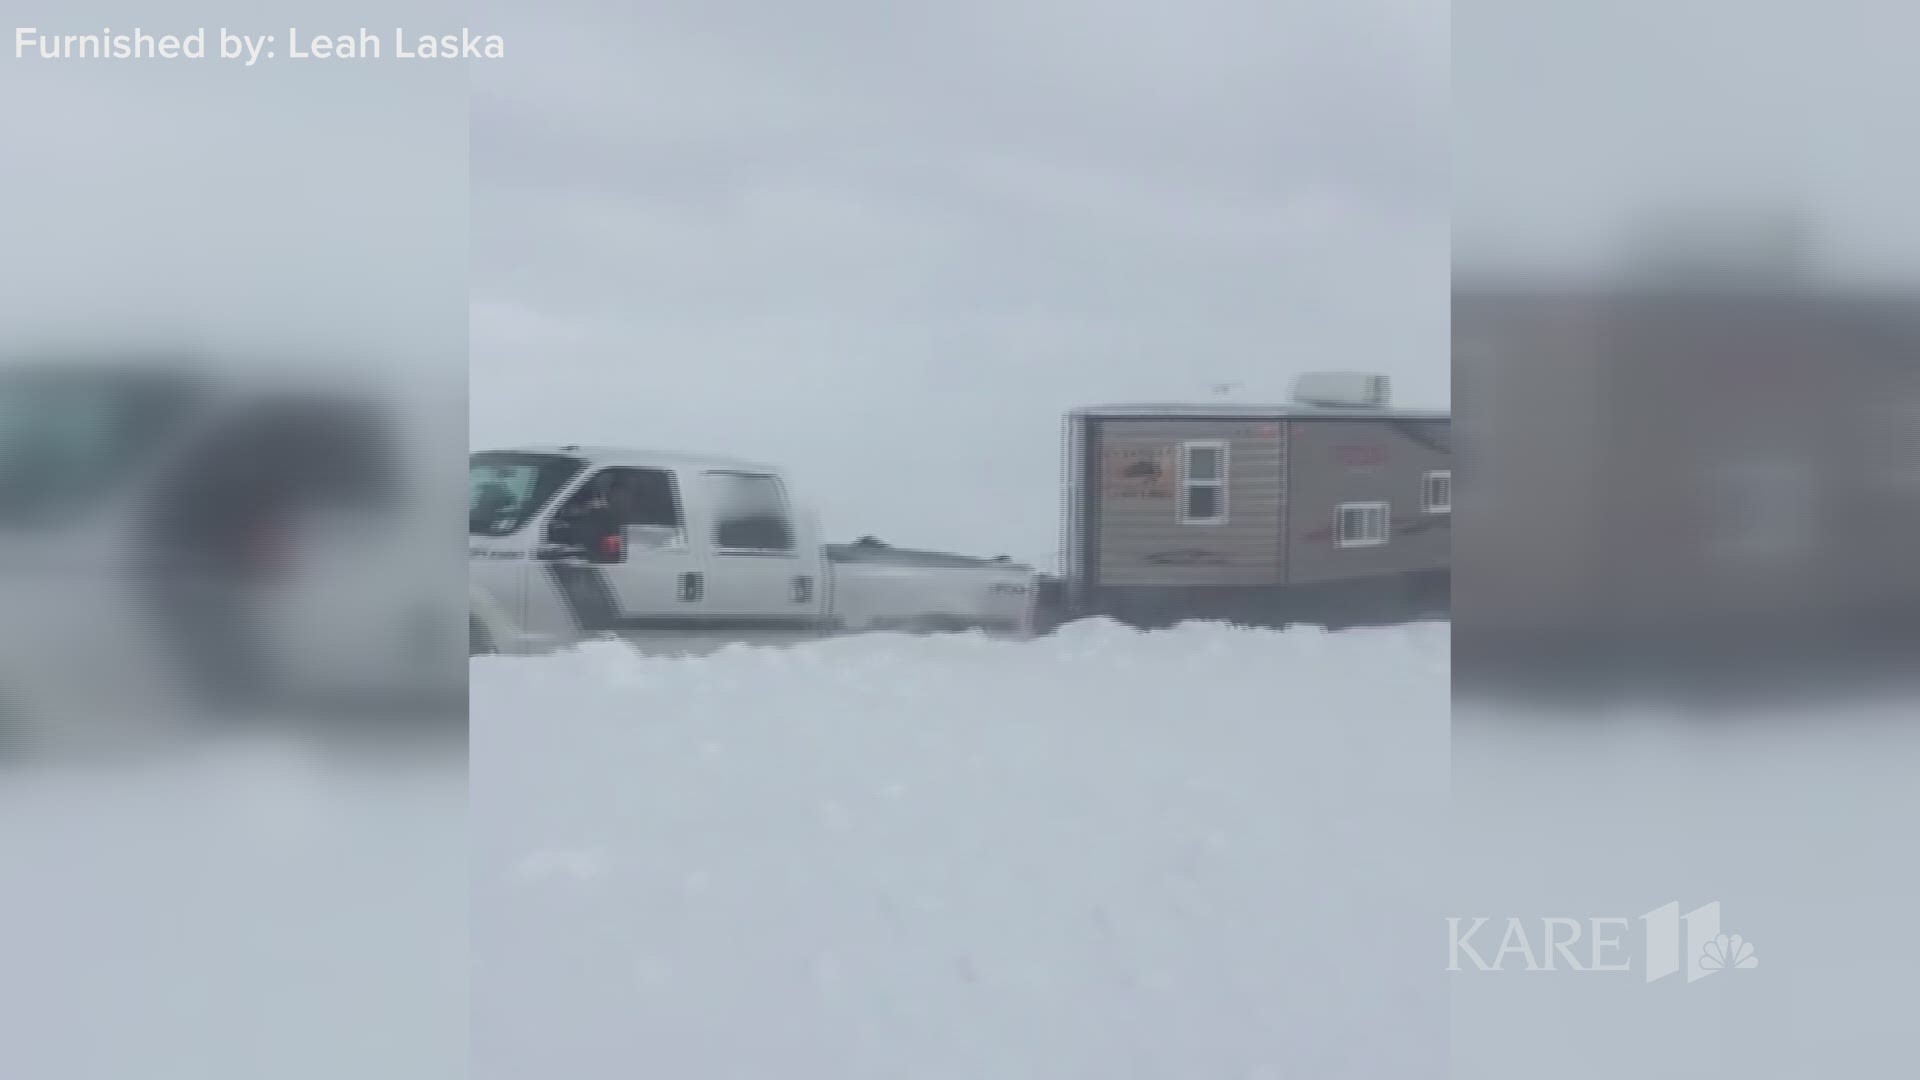 Heavy drifting on ice roads has left hundreds of ice anglers stranded across Lake Mille Lacs. The snow is so deep vehicles can't get back to the mainland, leaving those stranded keeping a worried eye on their propane and food supplies.